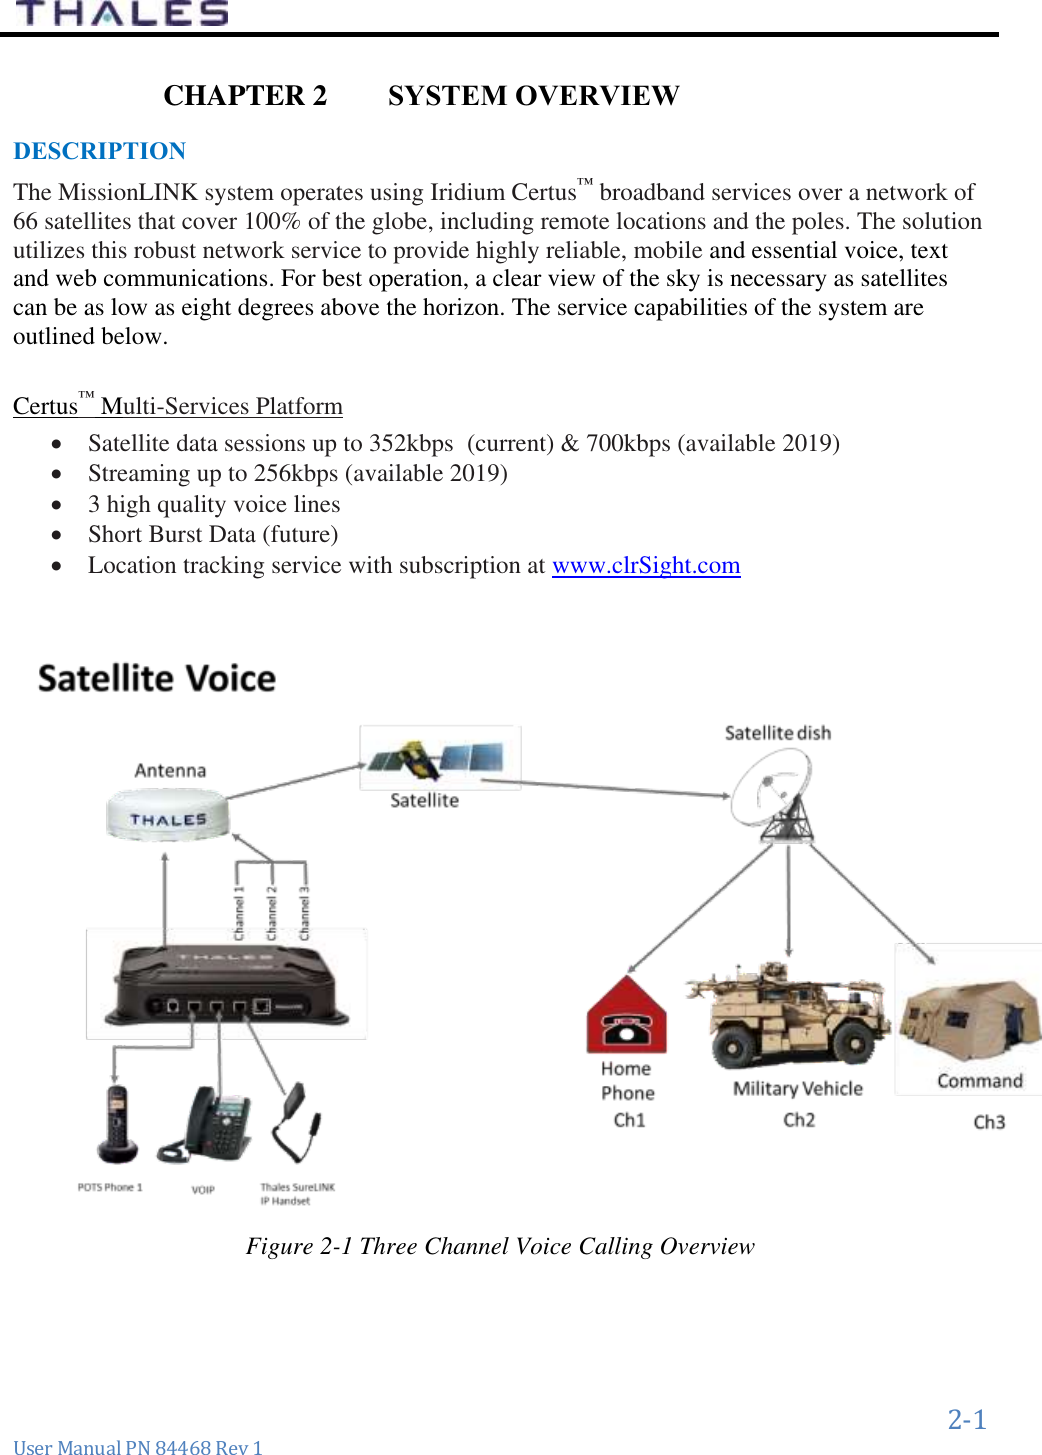      2-1 User Manual PN 84468 Rev 1  SYSTEM OVERVIEW CHAPTER 2DESCRIPTION The MissionLINK system operates using Iridium Certus™ broadband services over a network of 66 satellites that cover 100% of the globe, including remote locations and the poles. The solution utilizes this robust network service to provide highly reliable, mobile and essential voice, text and web communications. For best operation, a clear view of the sky is necessary as satellites can be as low as eight degrees above the horizon. The service capabilities of the system are outlined below.  Certus™ Multi-Services Platform   Satellite data sessions up to 352kbps  (current) &amp; 700kbps (available 2019)  Streaming up to 256kbps (available 2019)   3 high quality voice lines  Short Burst Data (future)  Location tracking service with subscription at www.clrSight.com    Figure 2-1 Three Channel Voice Calling Overview     